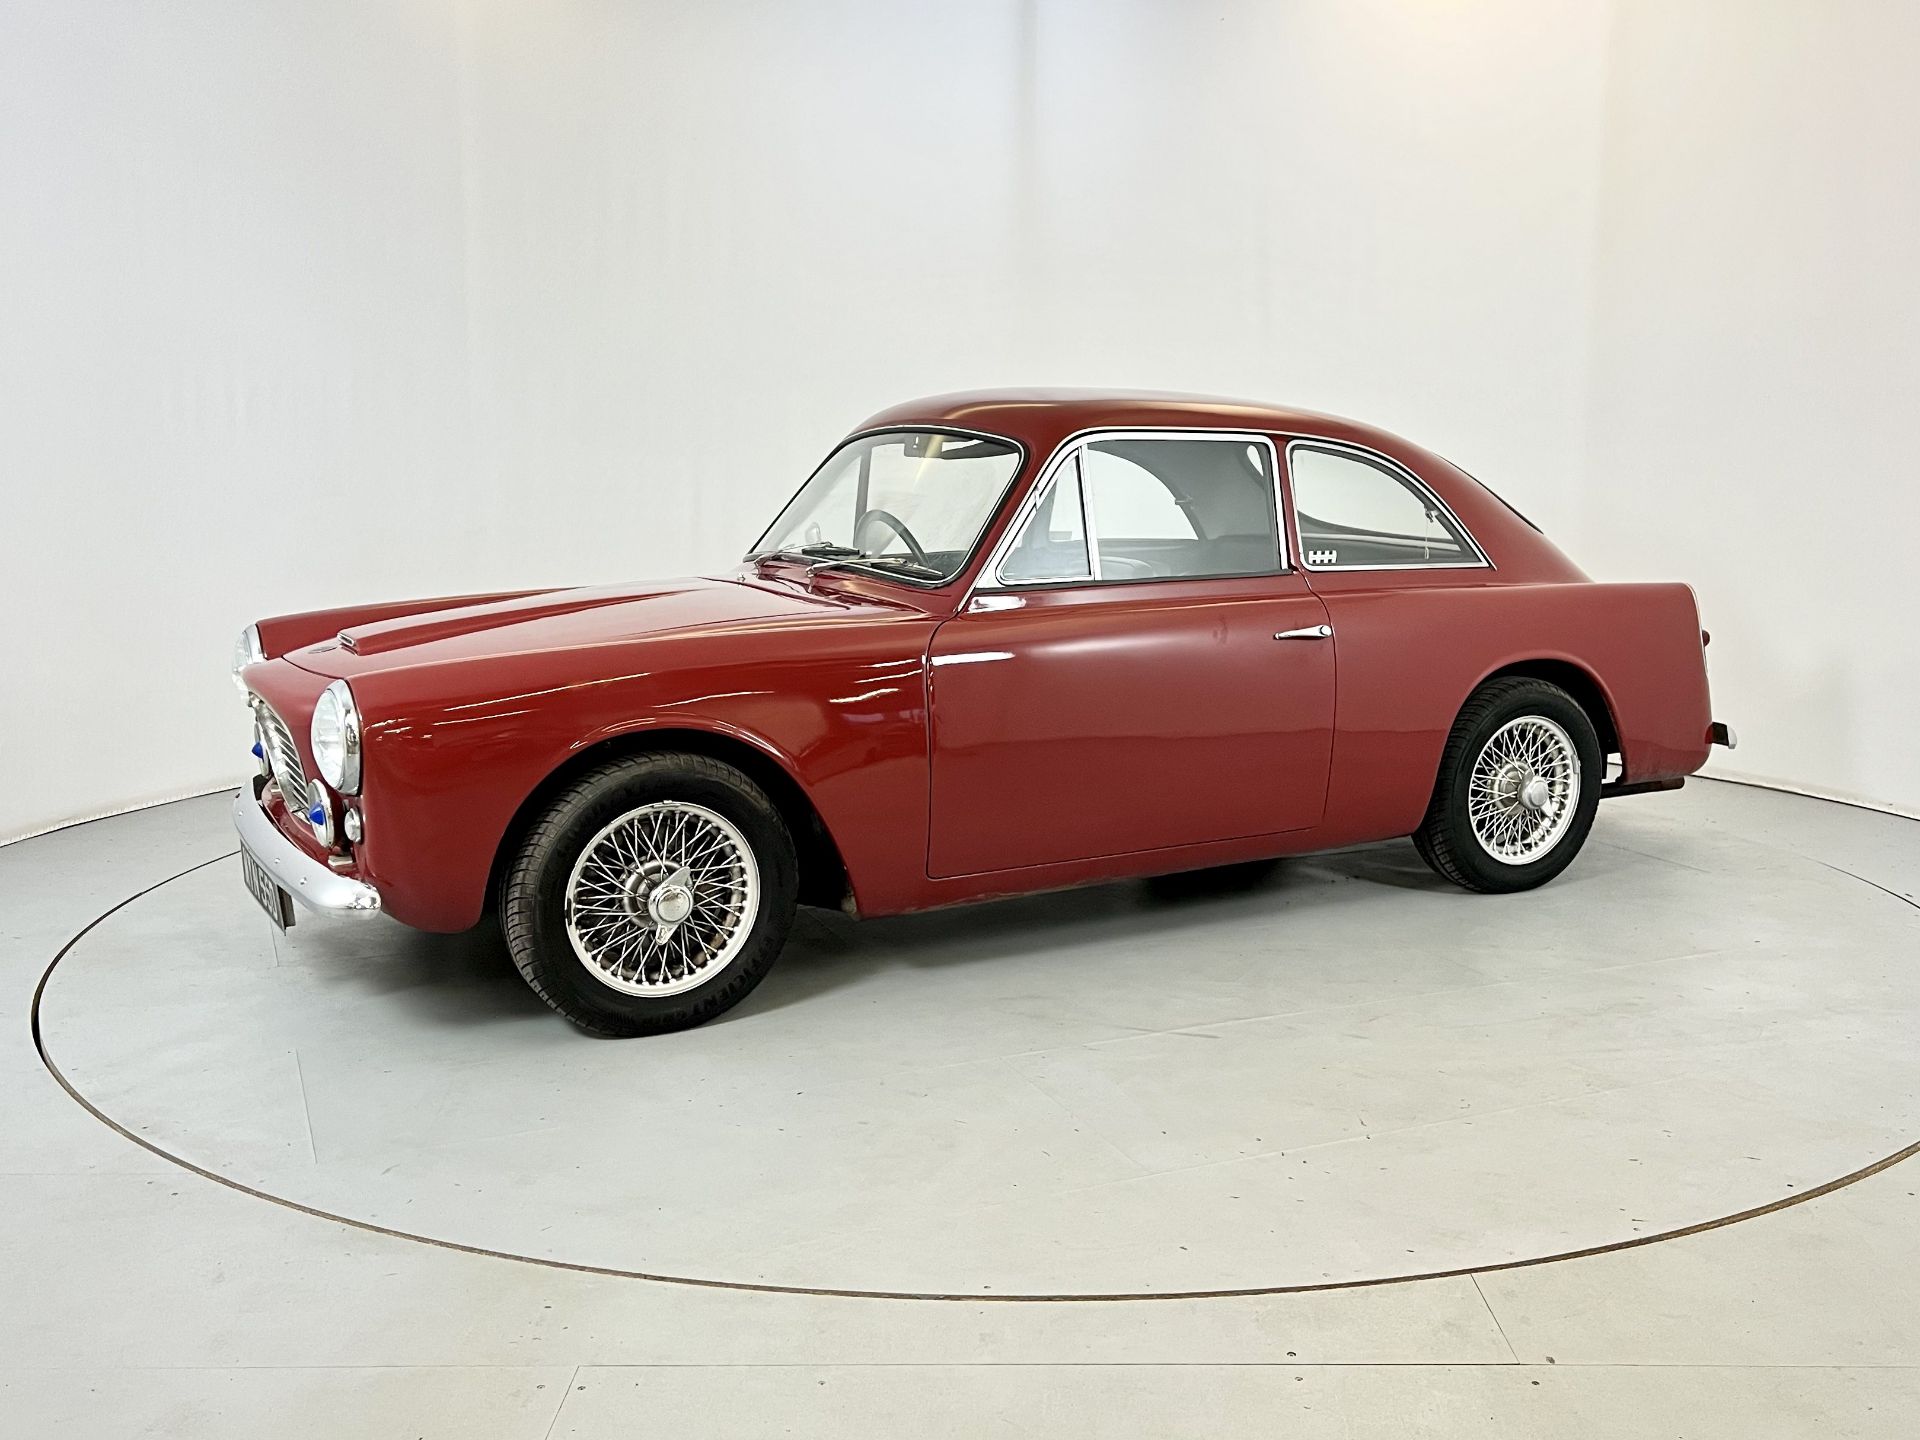 Gilbern 1800GT - Image 4 of 28